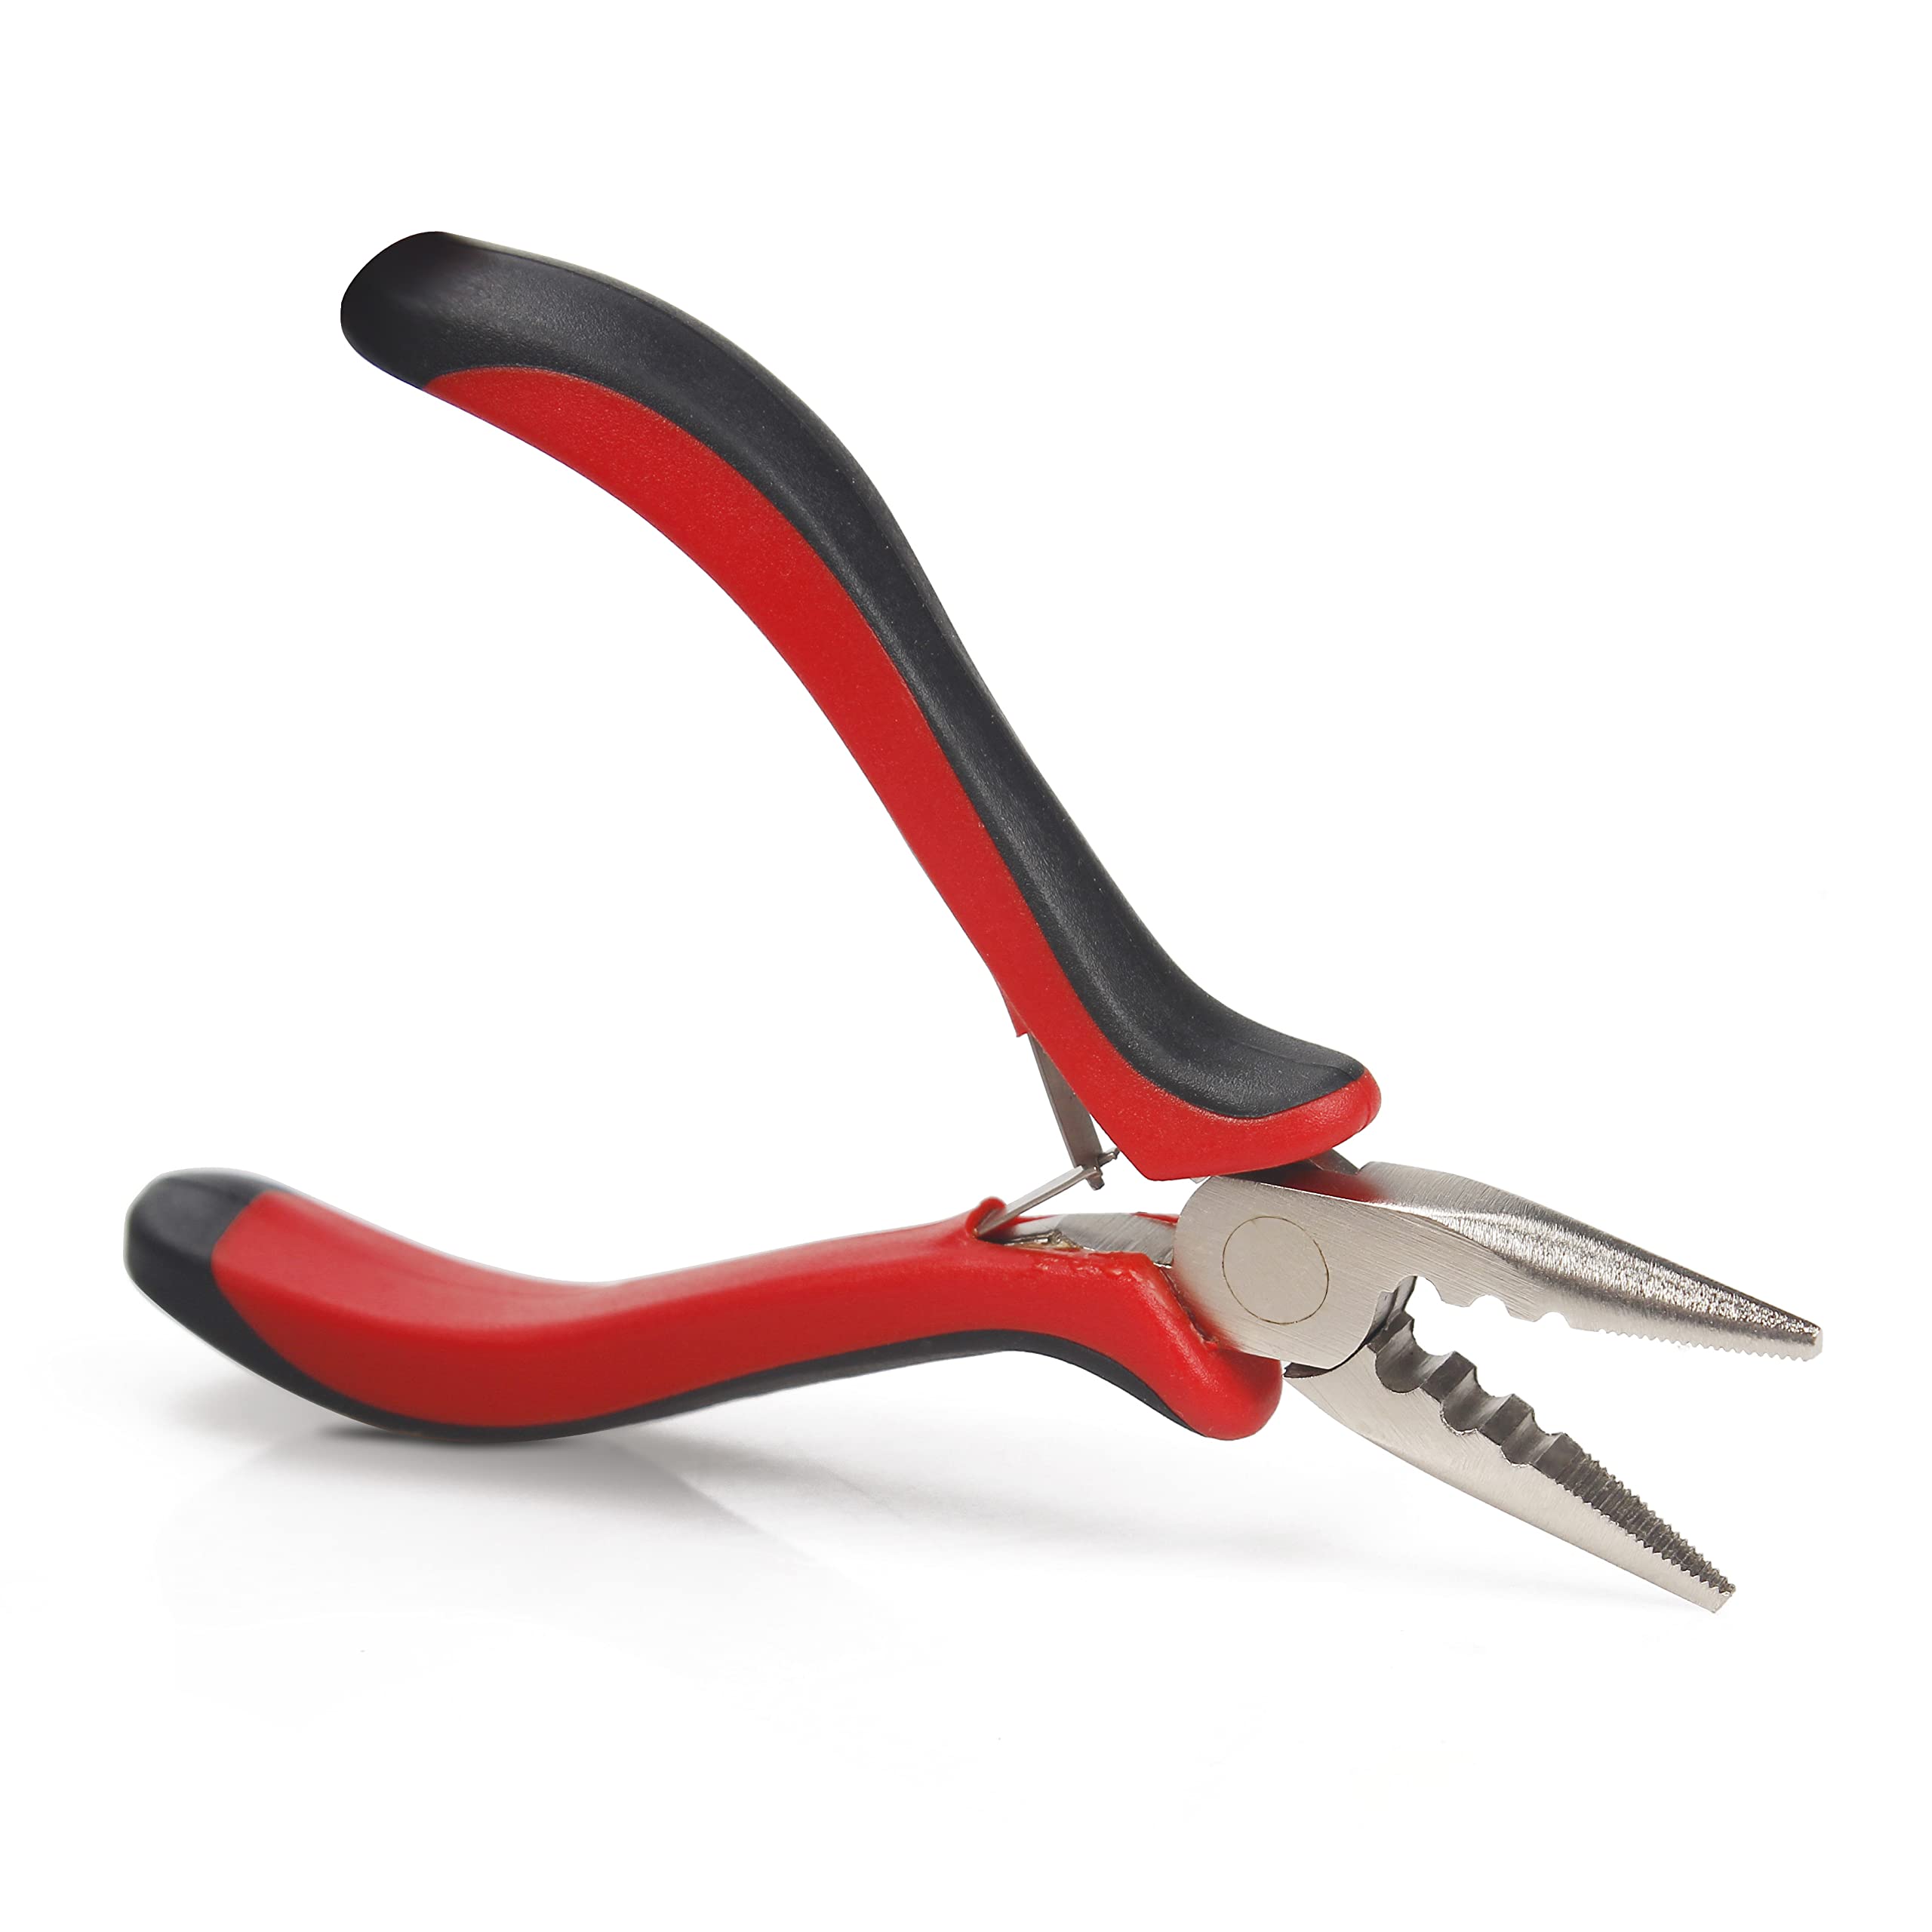  Wire Cutters for Jewelry Making Red Black - Needle